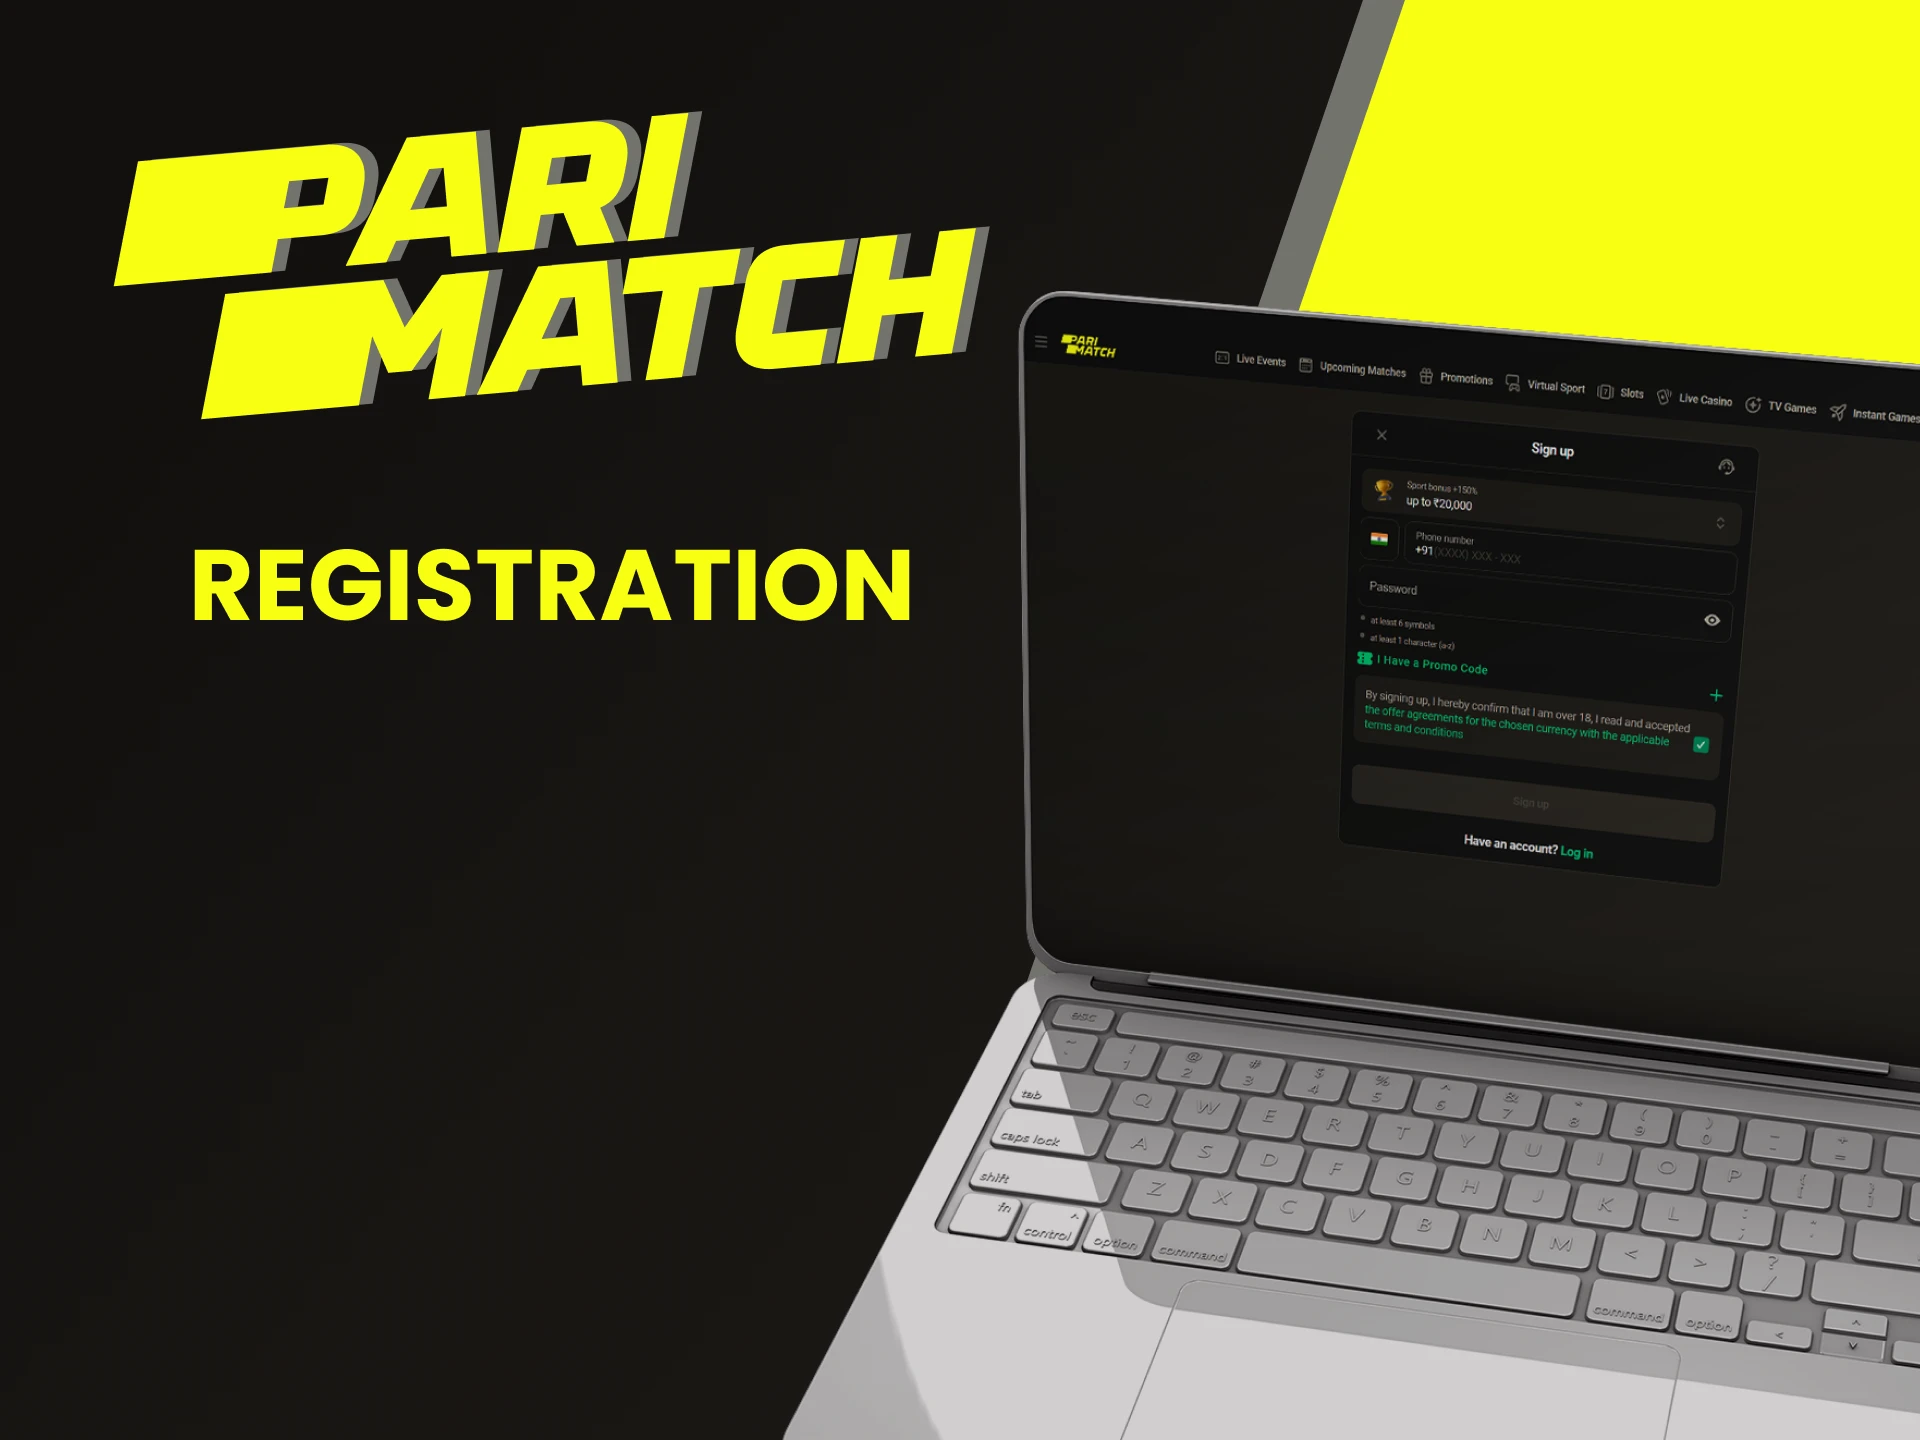 To bet on sports, you must go through the registration process on Parimatch.